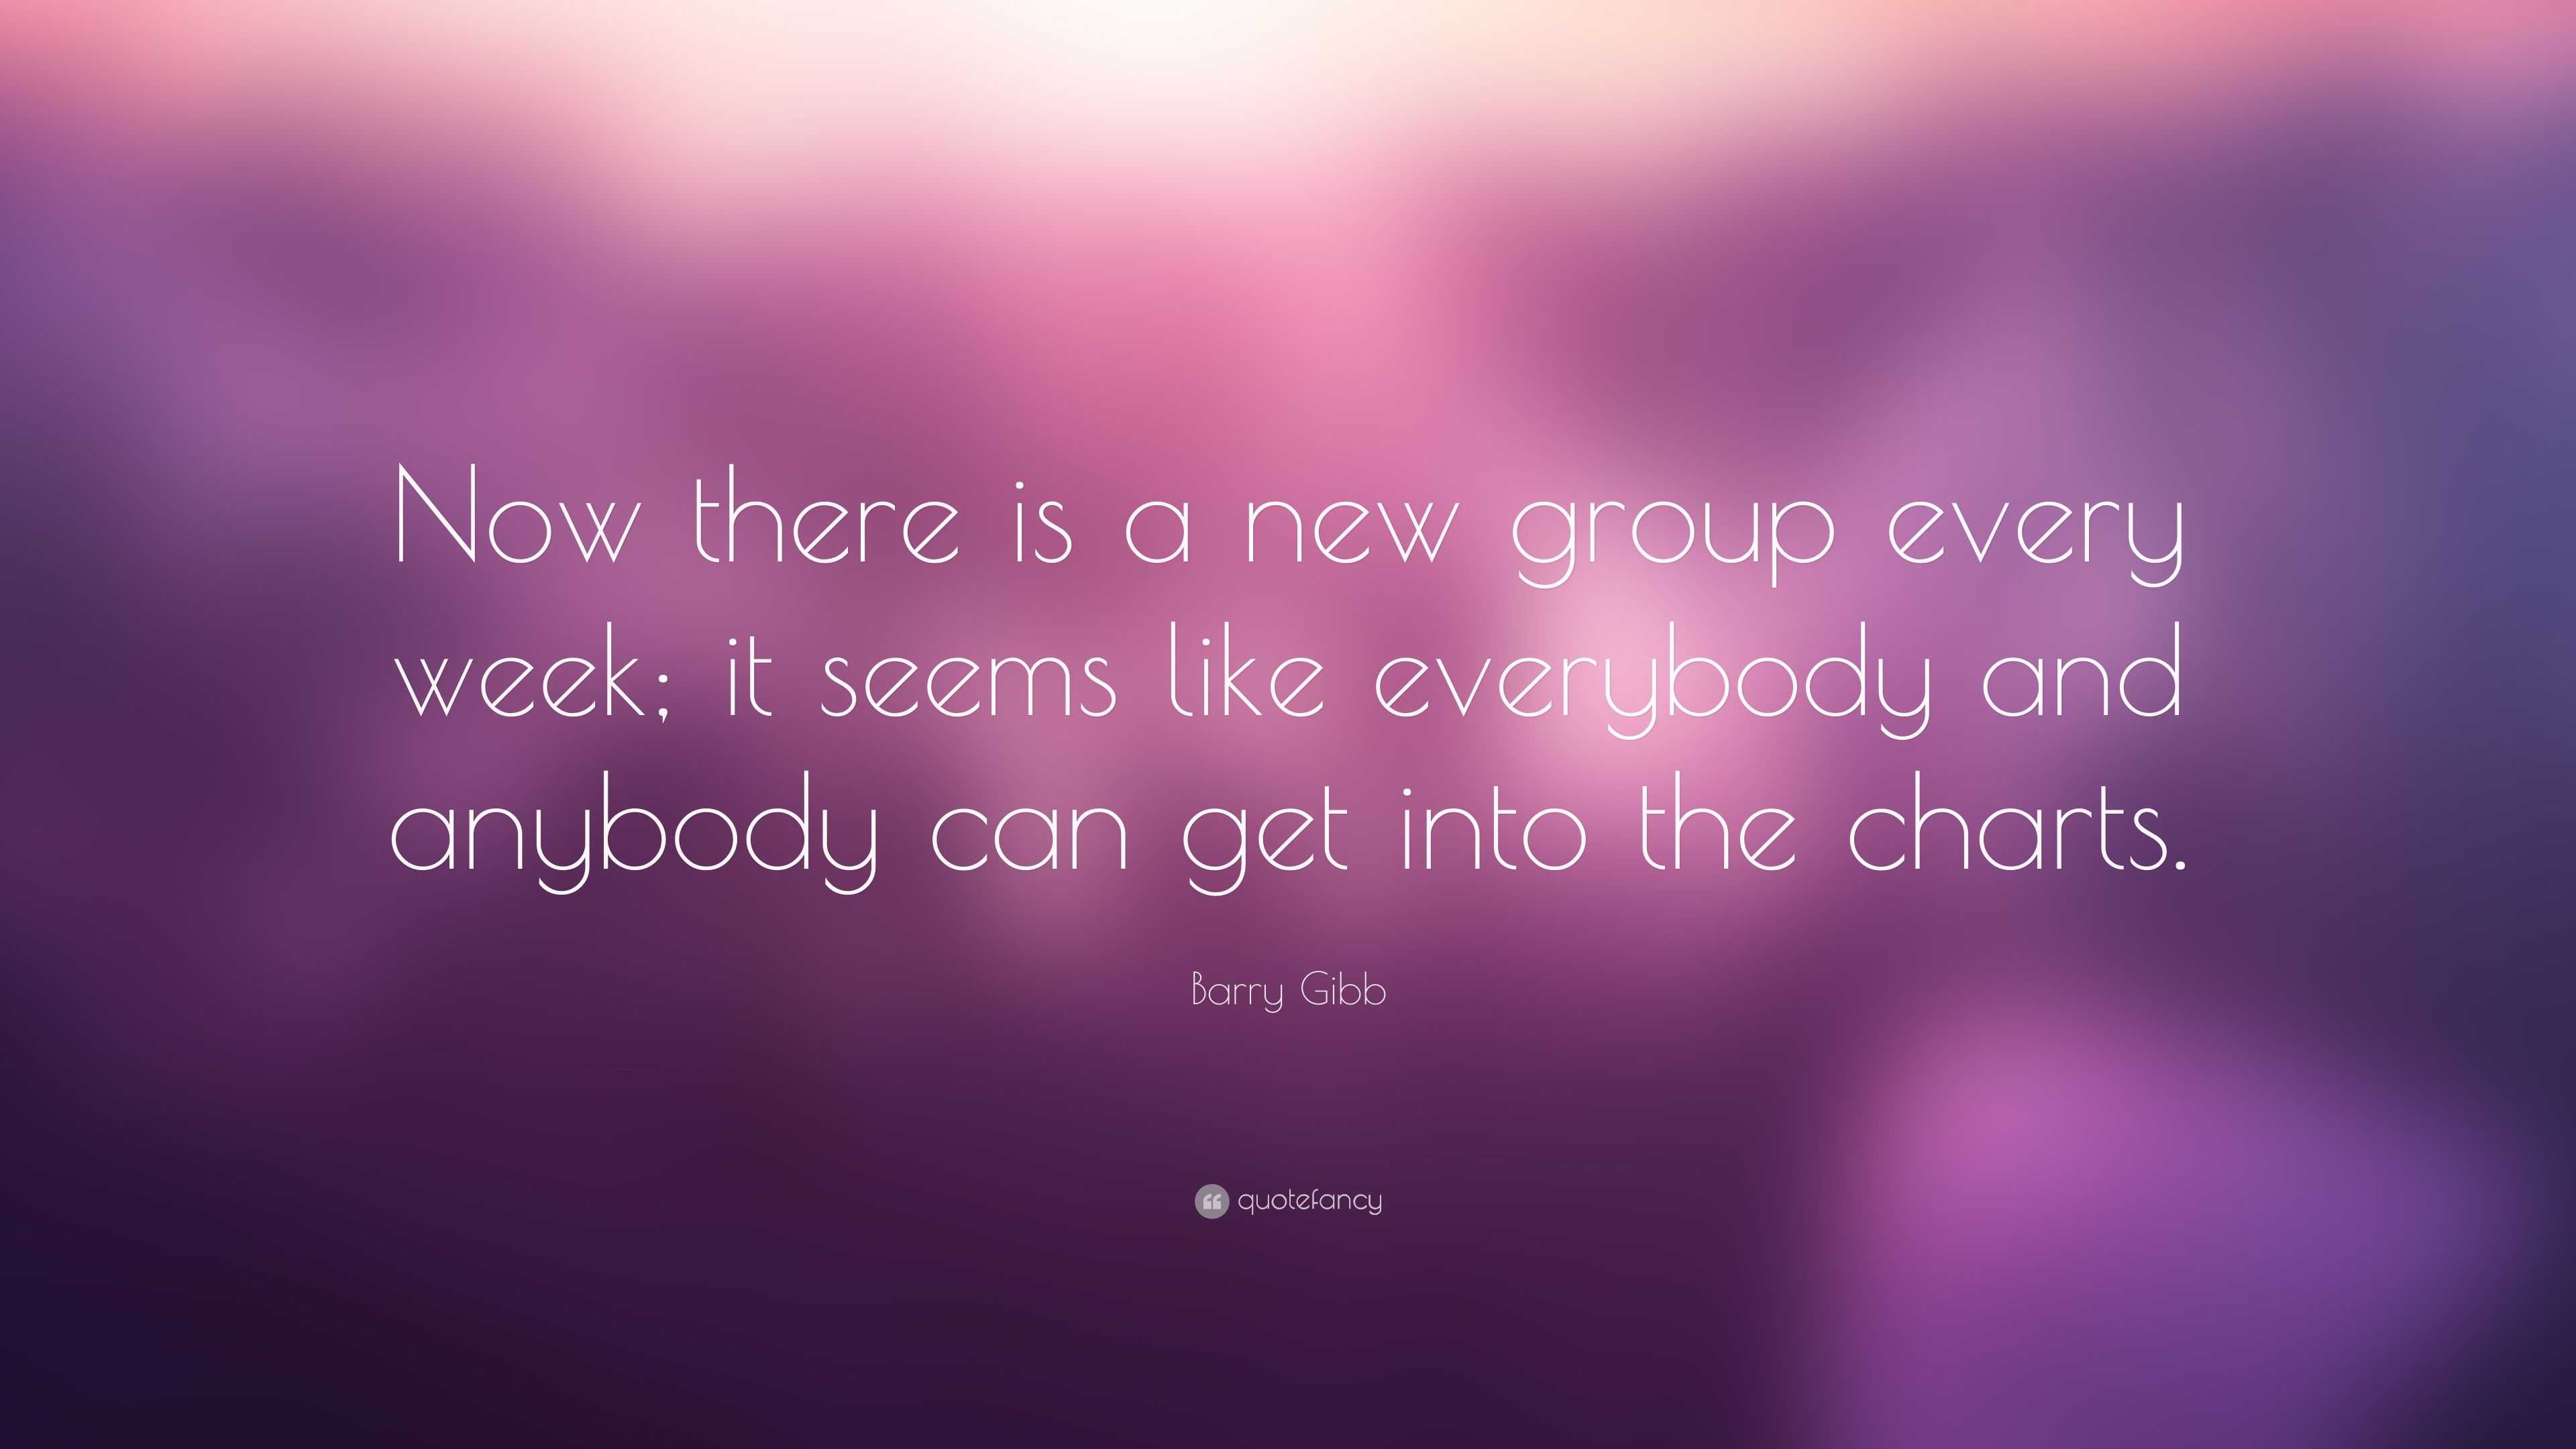 Barry Gibb Quote: “Now there is a new group every week; it seems like